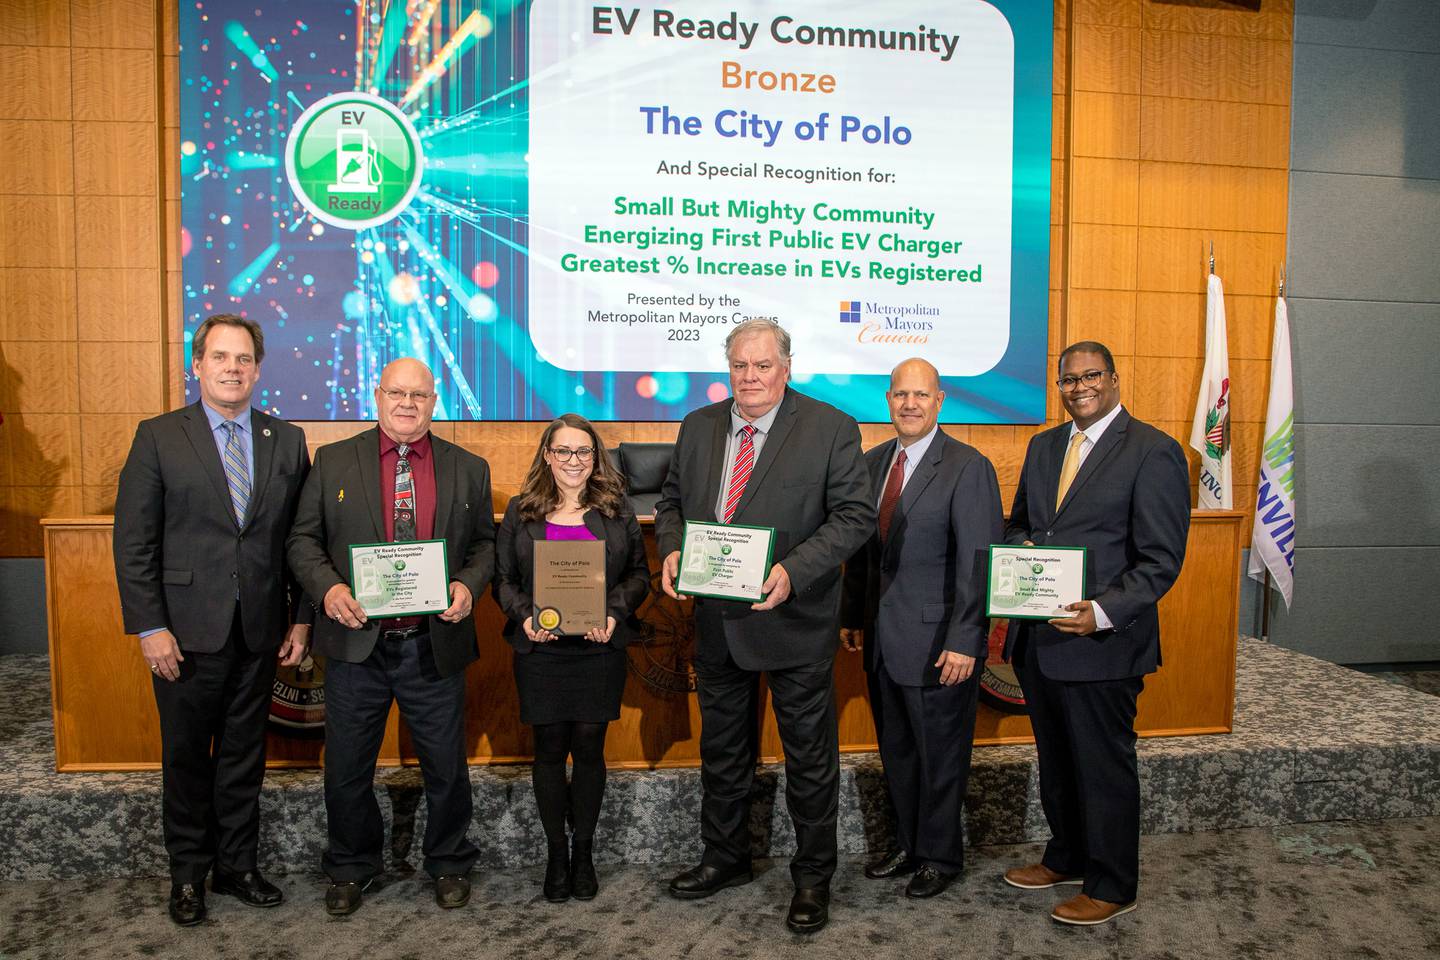 Polo Mayor Doug Knapp (second from left), City Clerk Sydney Bartelt (center left) and Polo Alderman and Ogle County Economic Development Corporation President Randy Schoon (center right) accept awards recognizing the work Polo has done to become ready for electric vehicles on Thursday, Dec. 7, 2023, in Warrenville. Also pictured, left to right, are: Kevin Burns, mayor of Geneva and chair of the Metropolitan Mayors Caucus' Environment Committee and Energy Subcommittee; Louie Binswanger, ComEd senior vice president of Governmental, Regulatory and External Affairs; and Neil James, Metropolitan Mayors Caucus executive director.